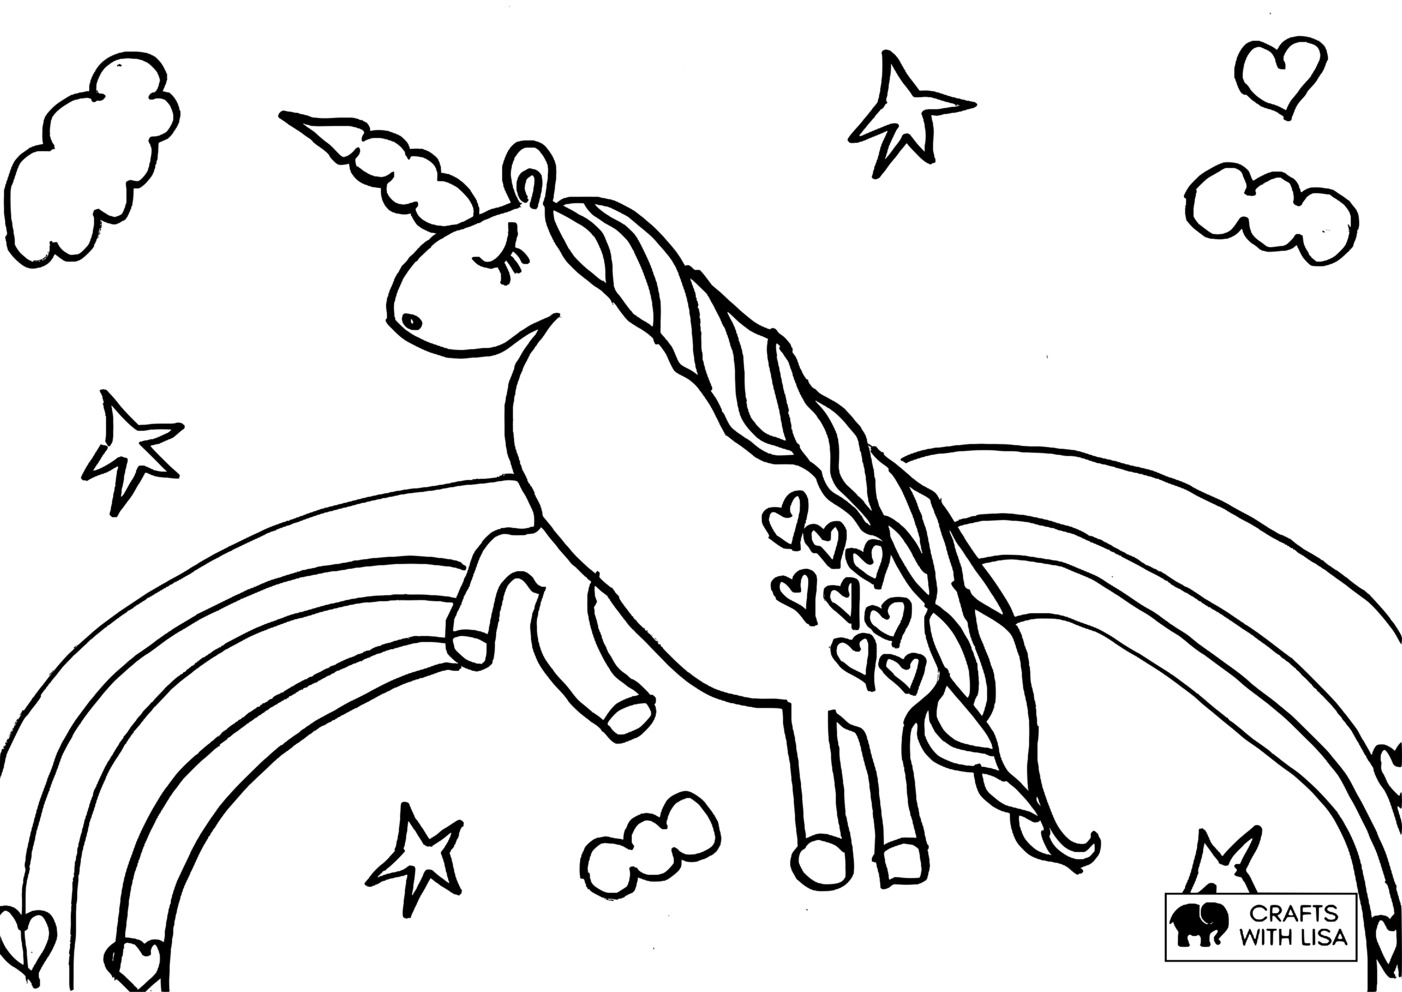 rainbows coloring pages